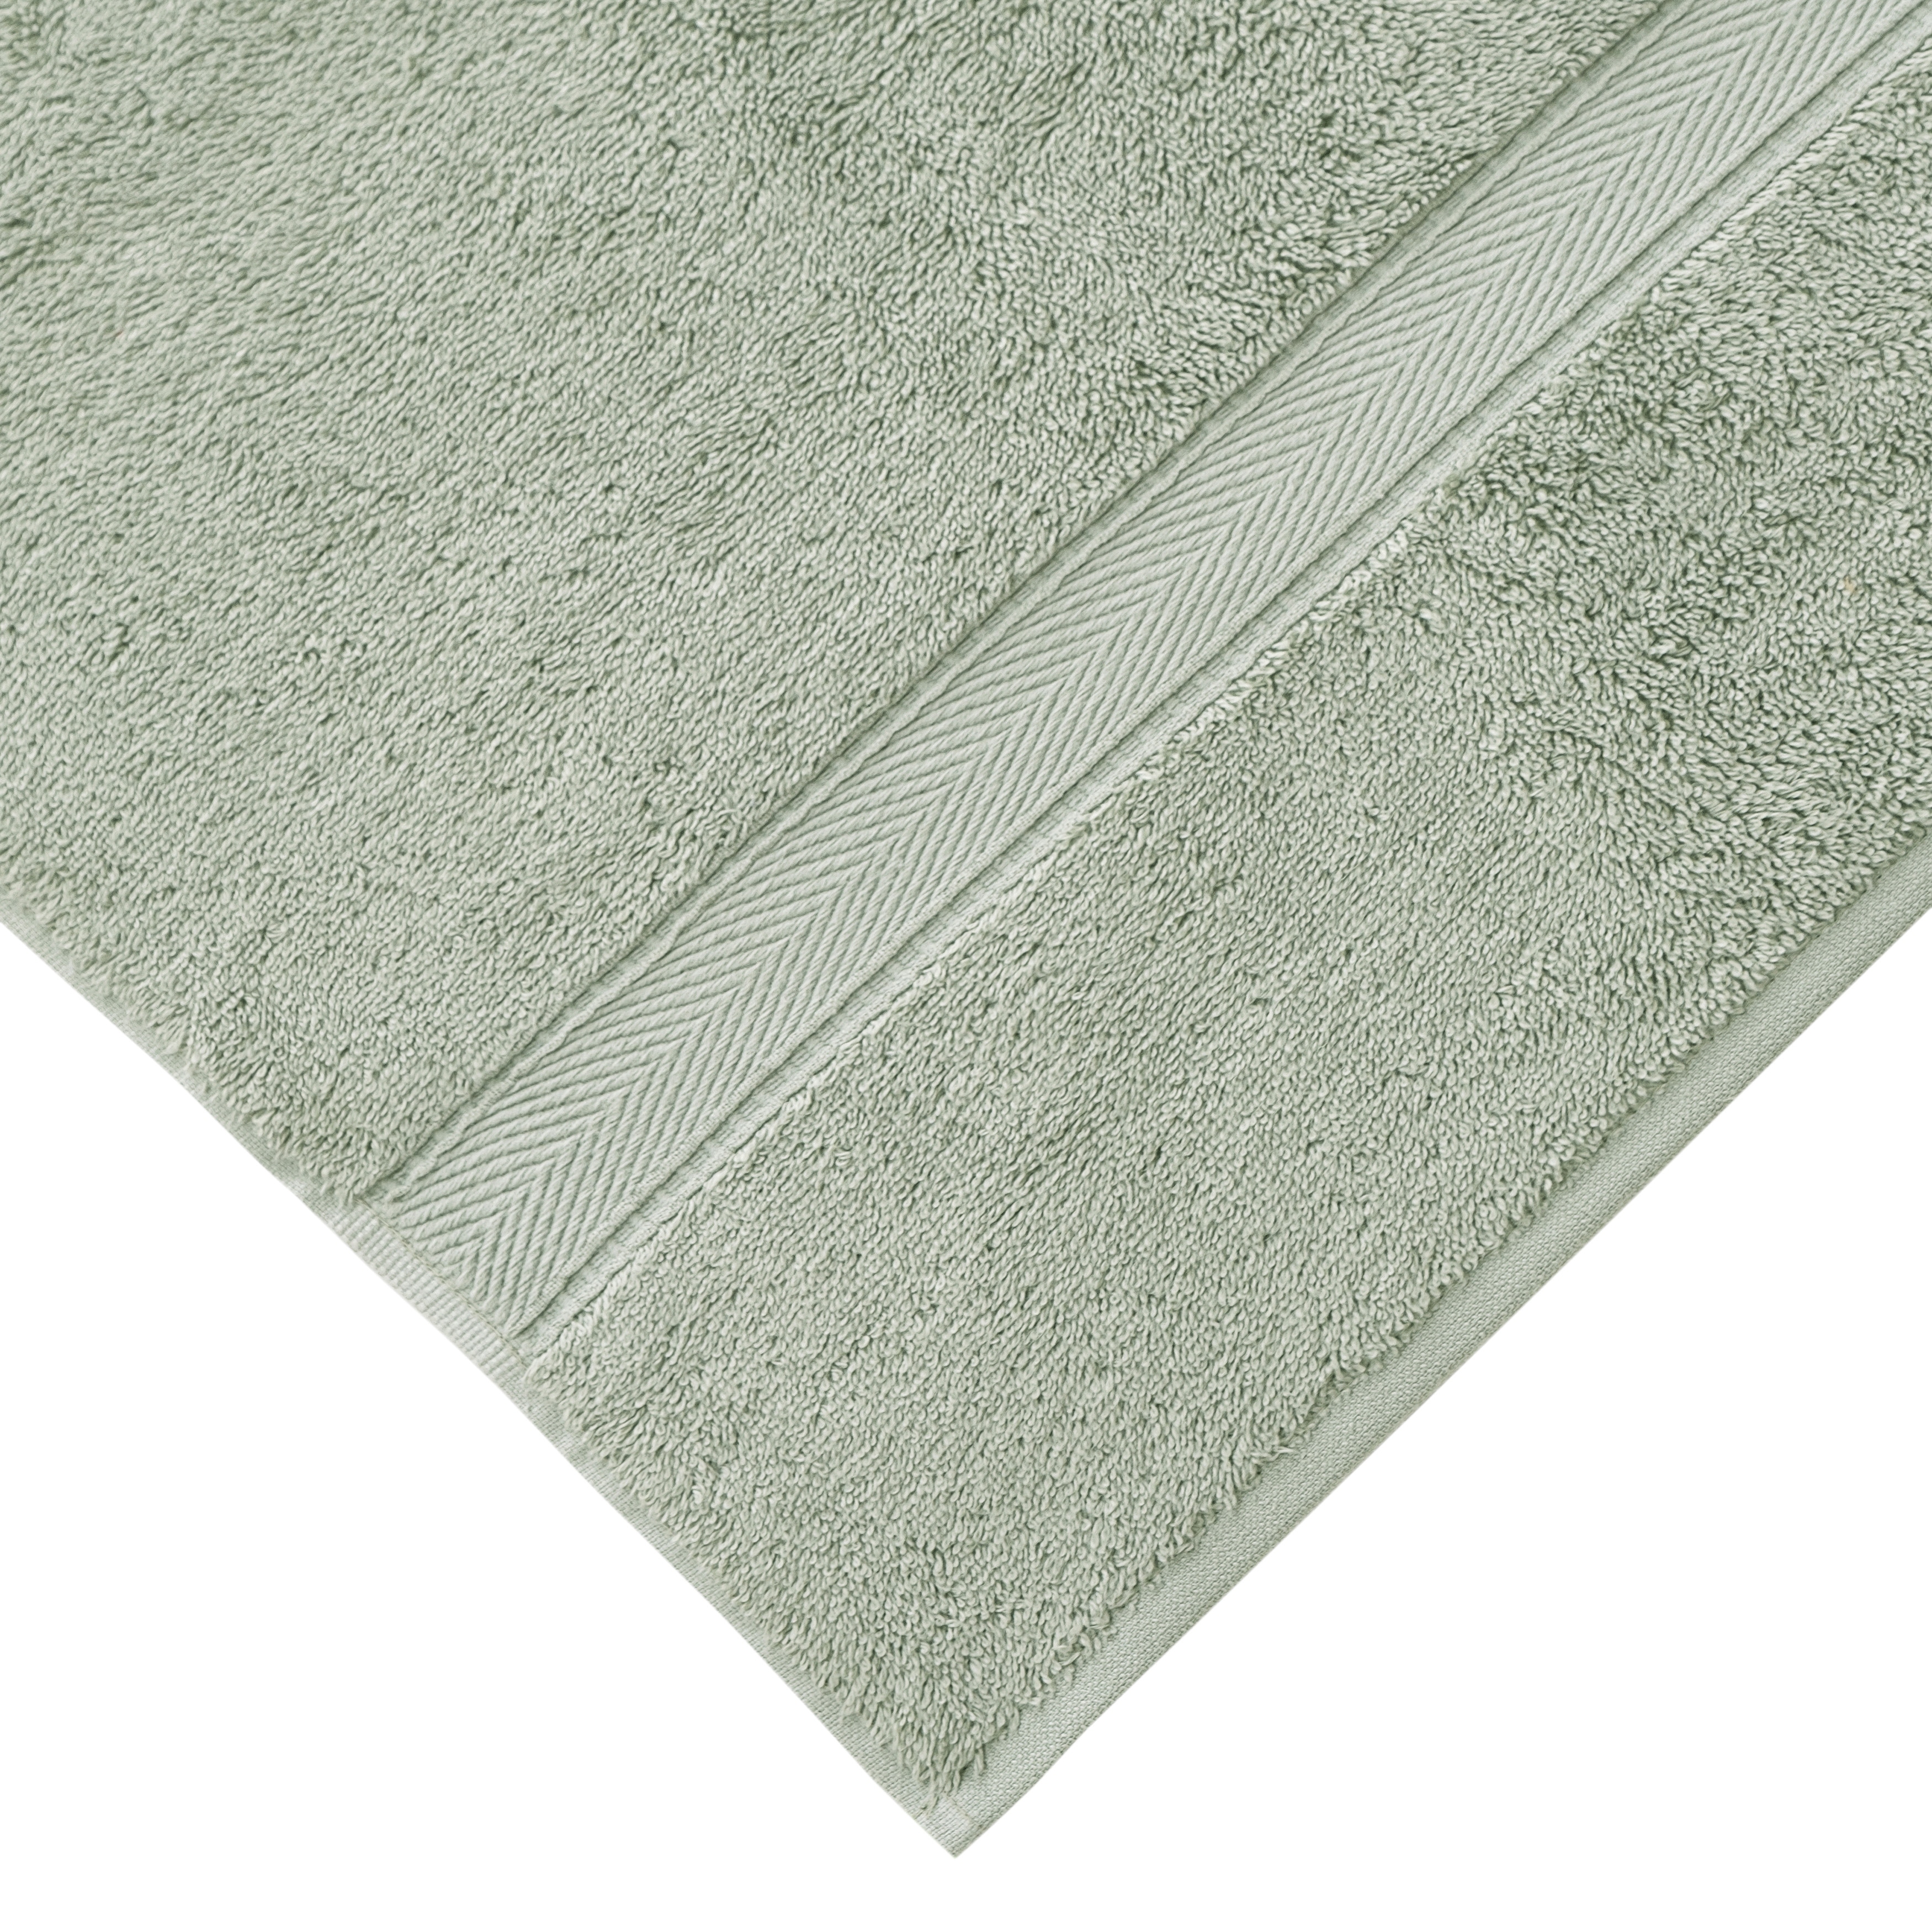 Royal Turkish Cotton Bathroom Towels - Hotel Collection Towel Set of 4 - On  Sale - Bed Bath & Beyond - 7951720